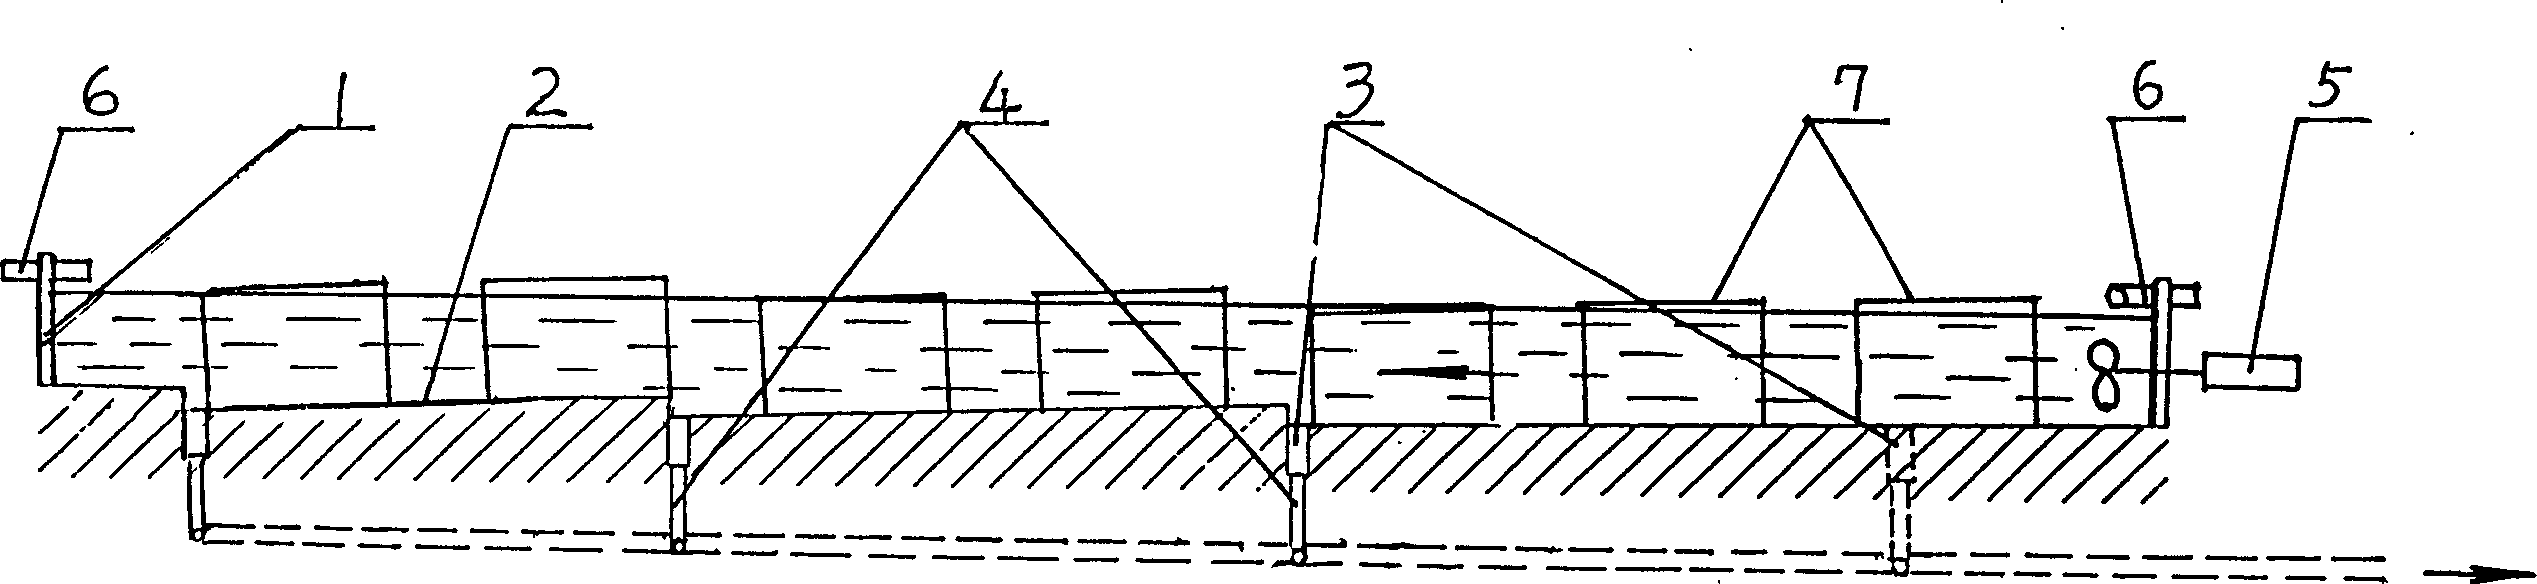 Fish cultivating water trough apparatus